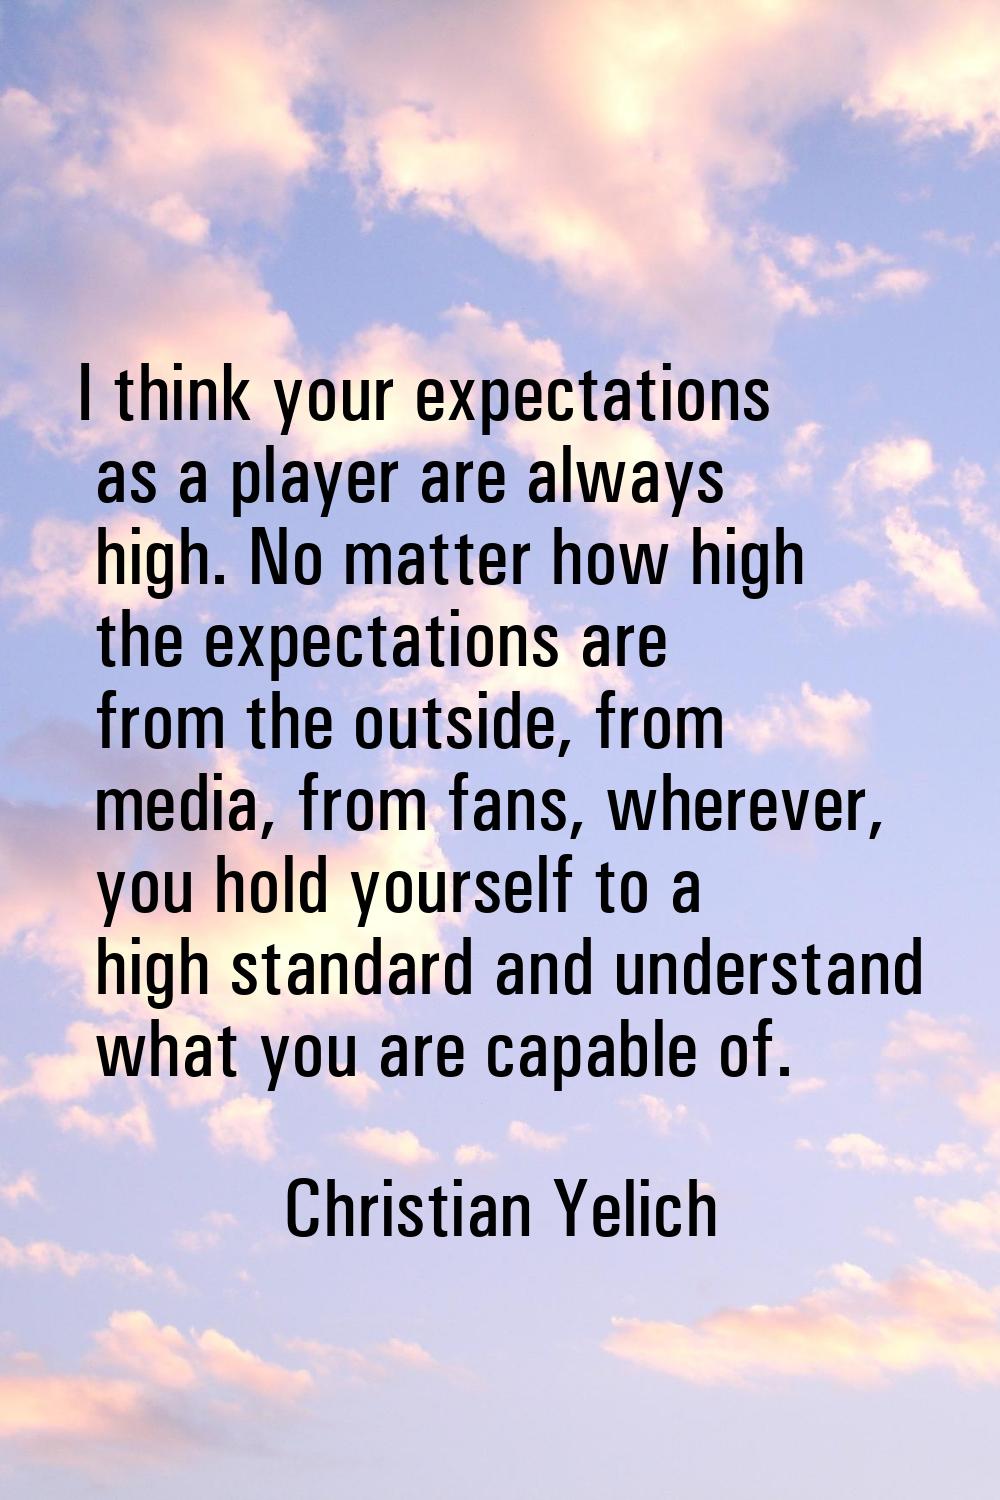 I think your expectations as a player are always high. No matter how high the expectations are from